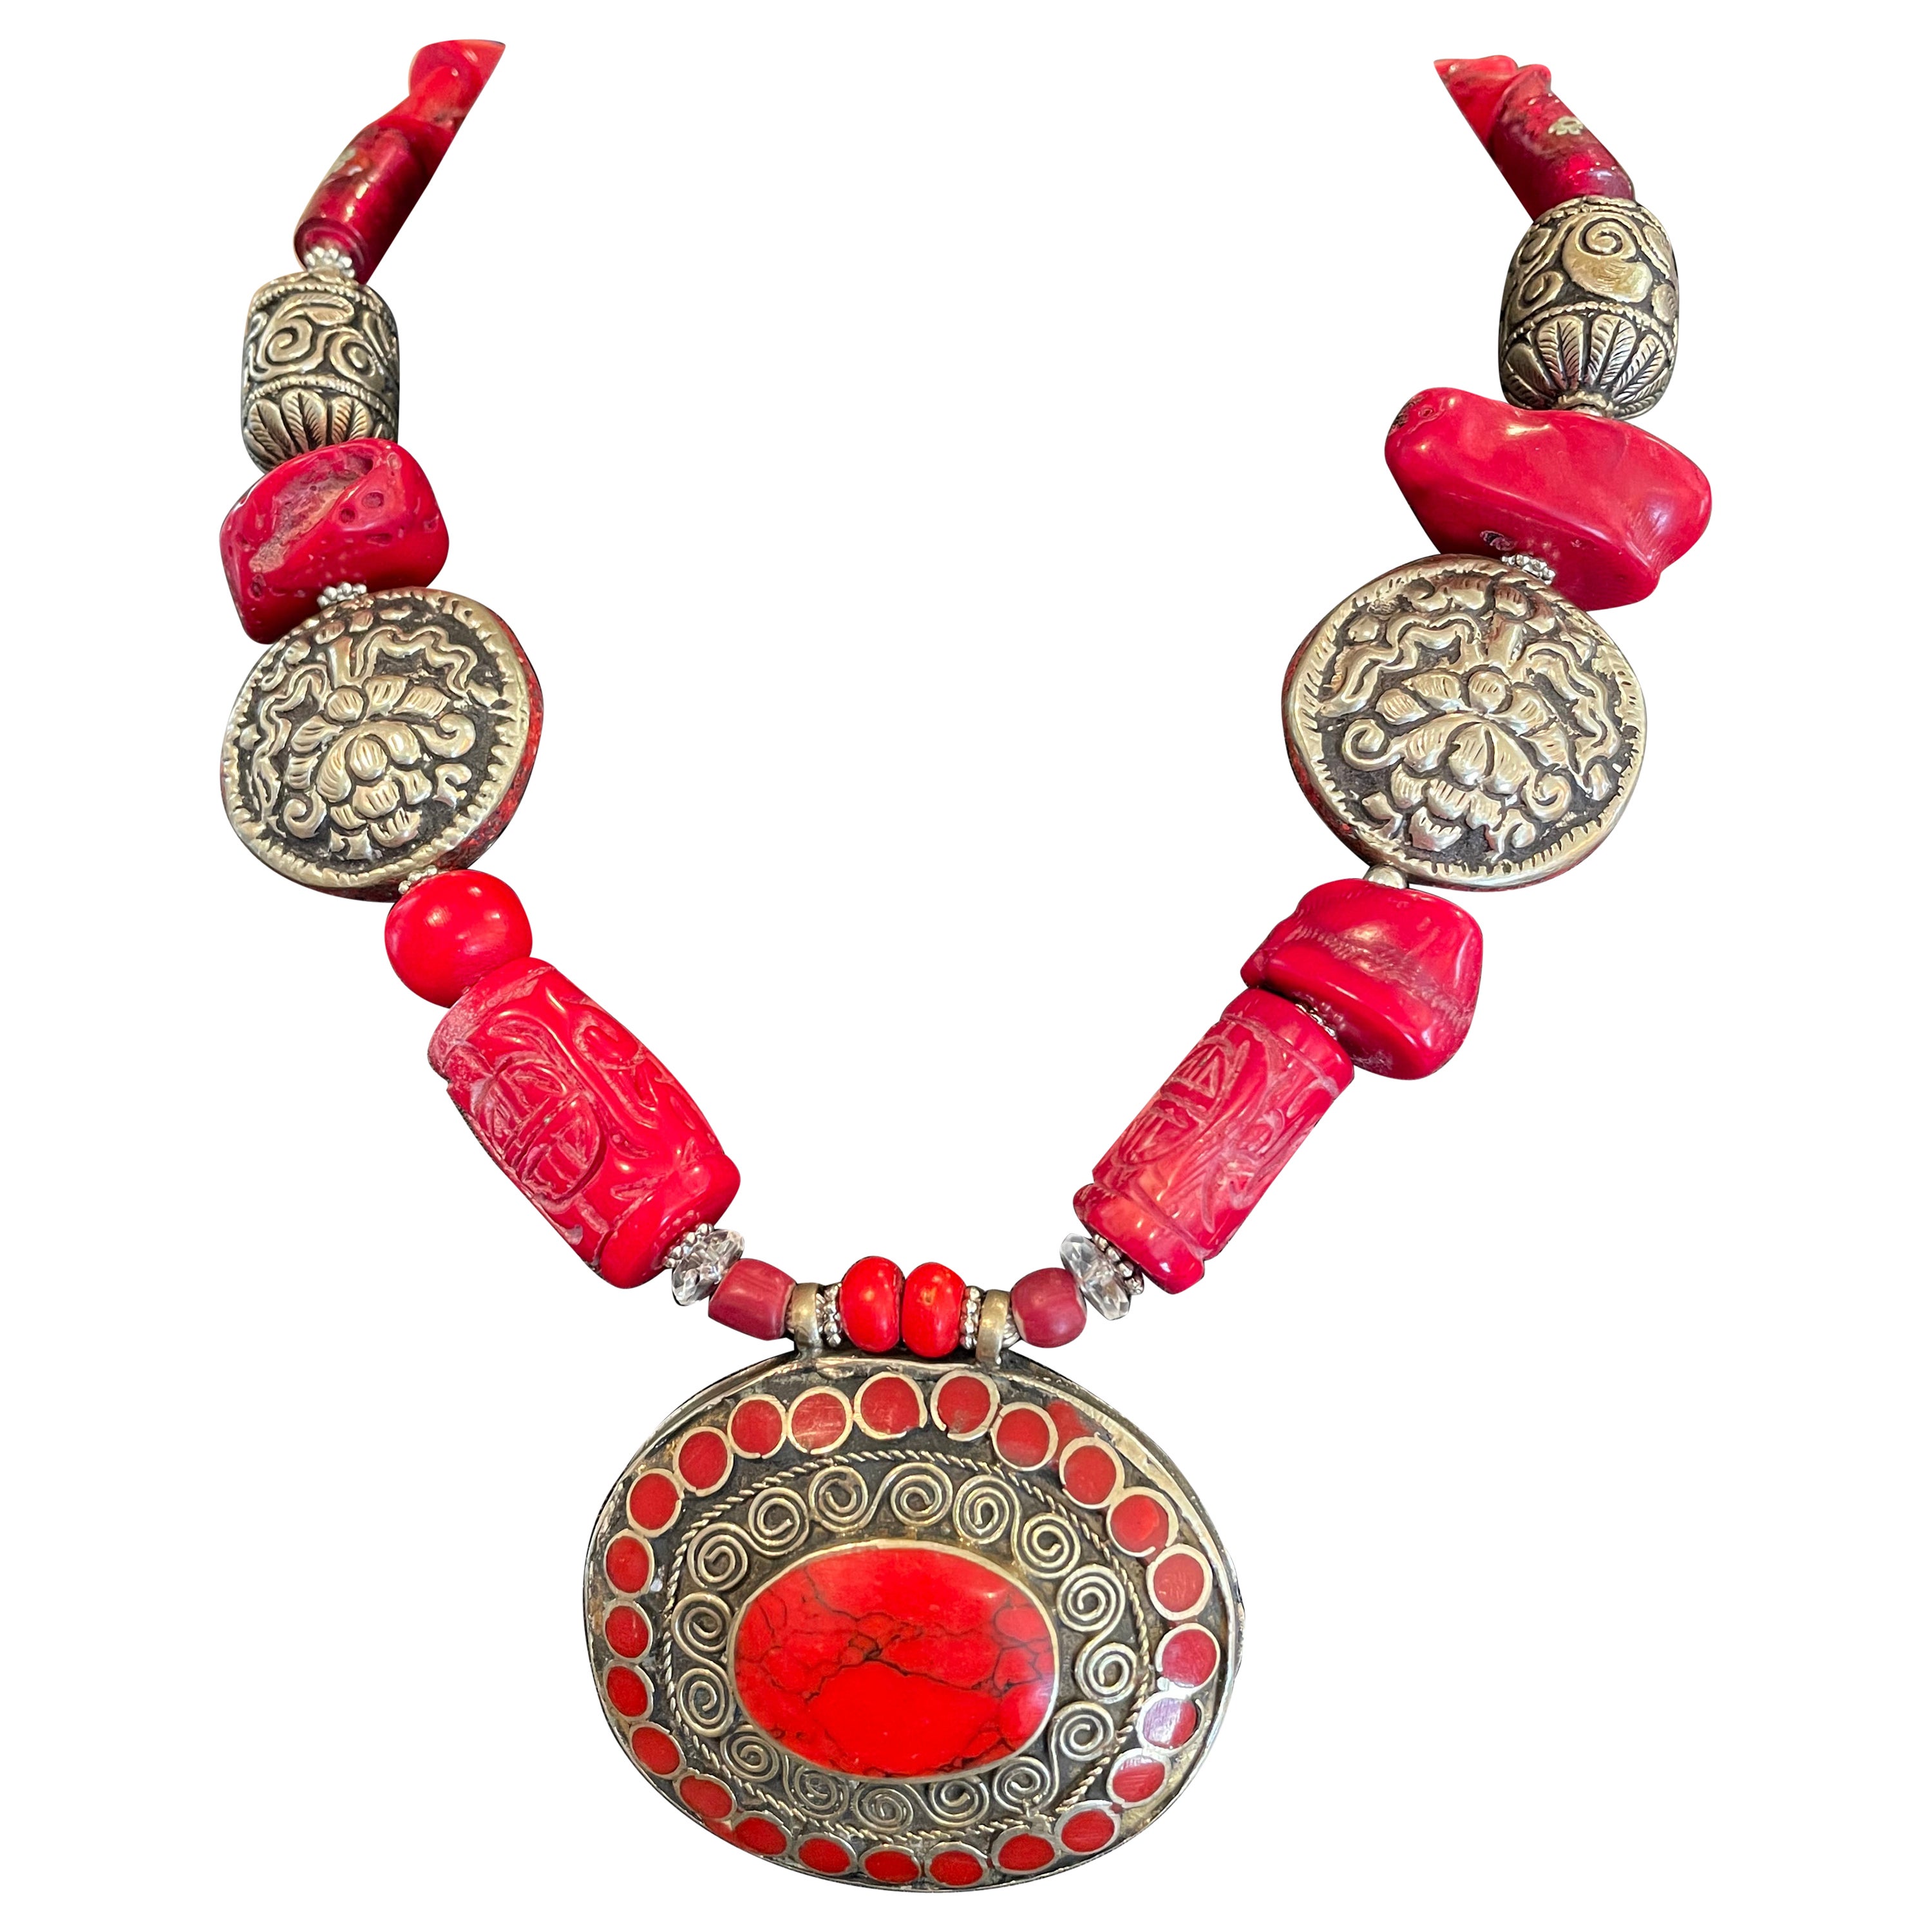 LB offers a Tribal Tibetan Coral Silver pendant Coral Glass Silver necklace For Sale